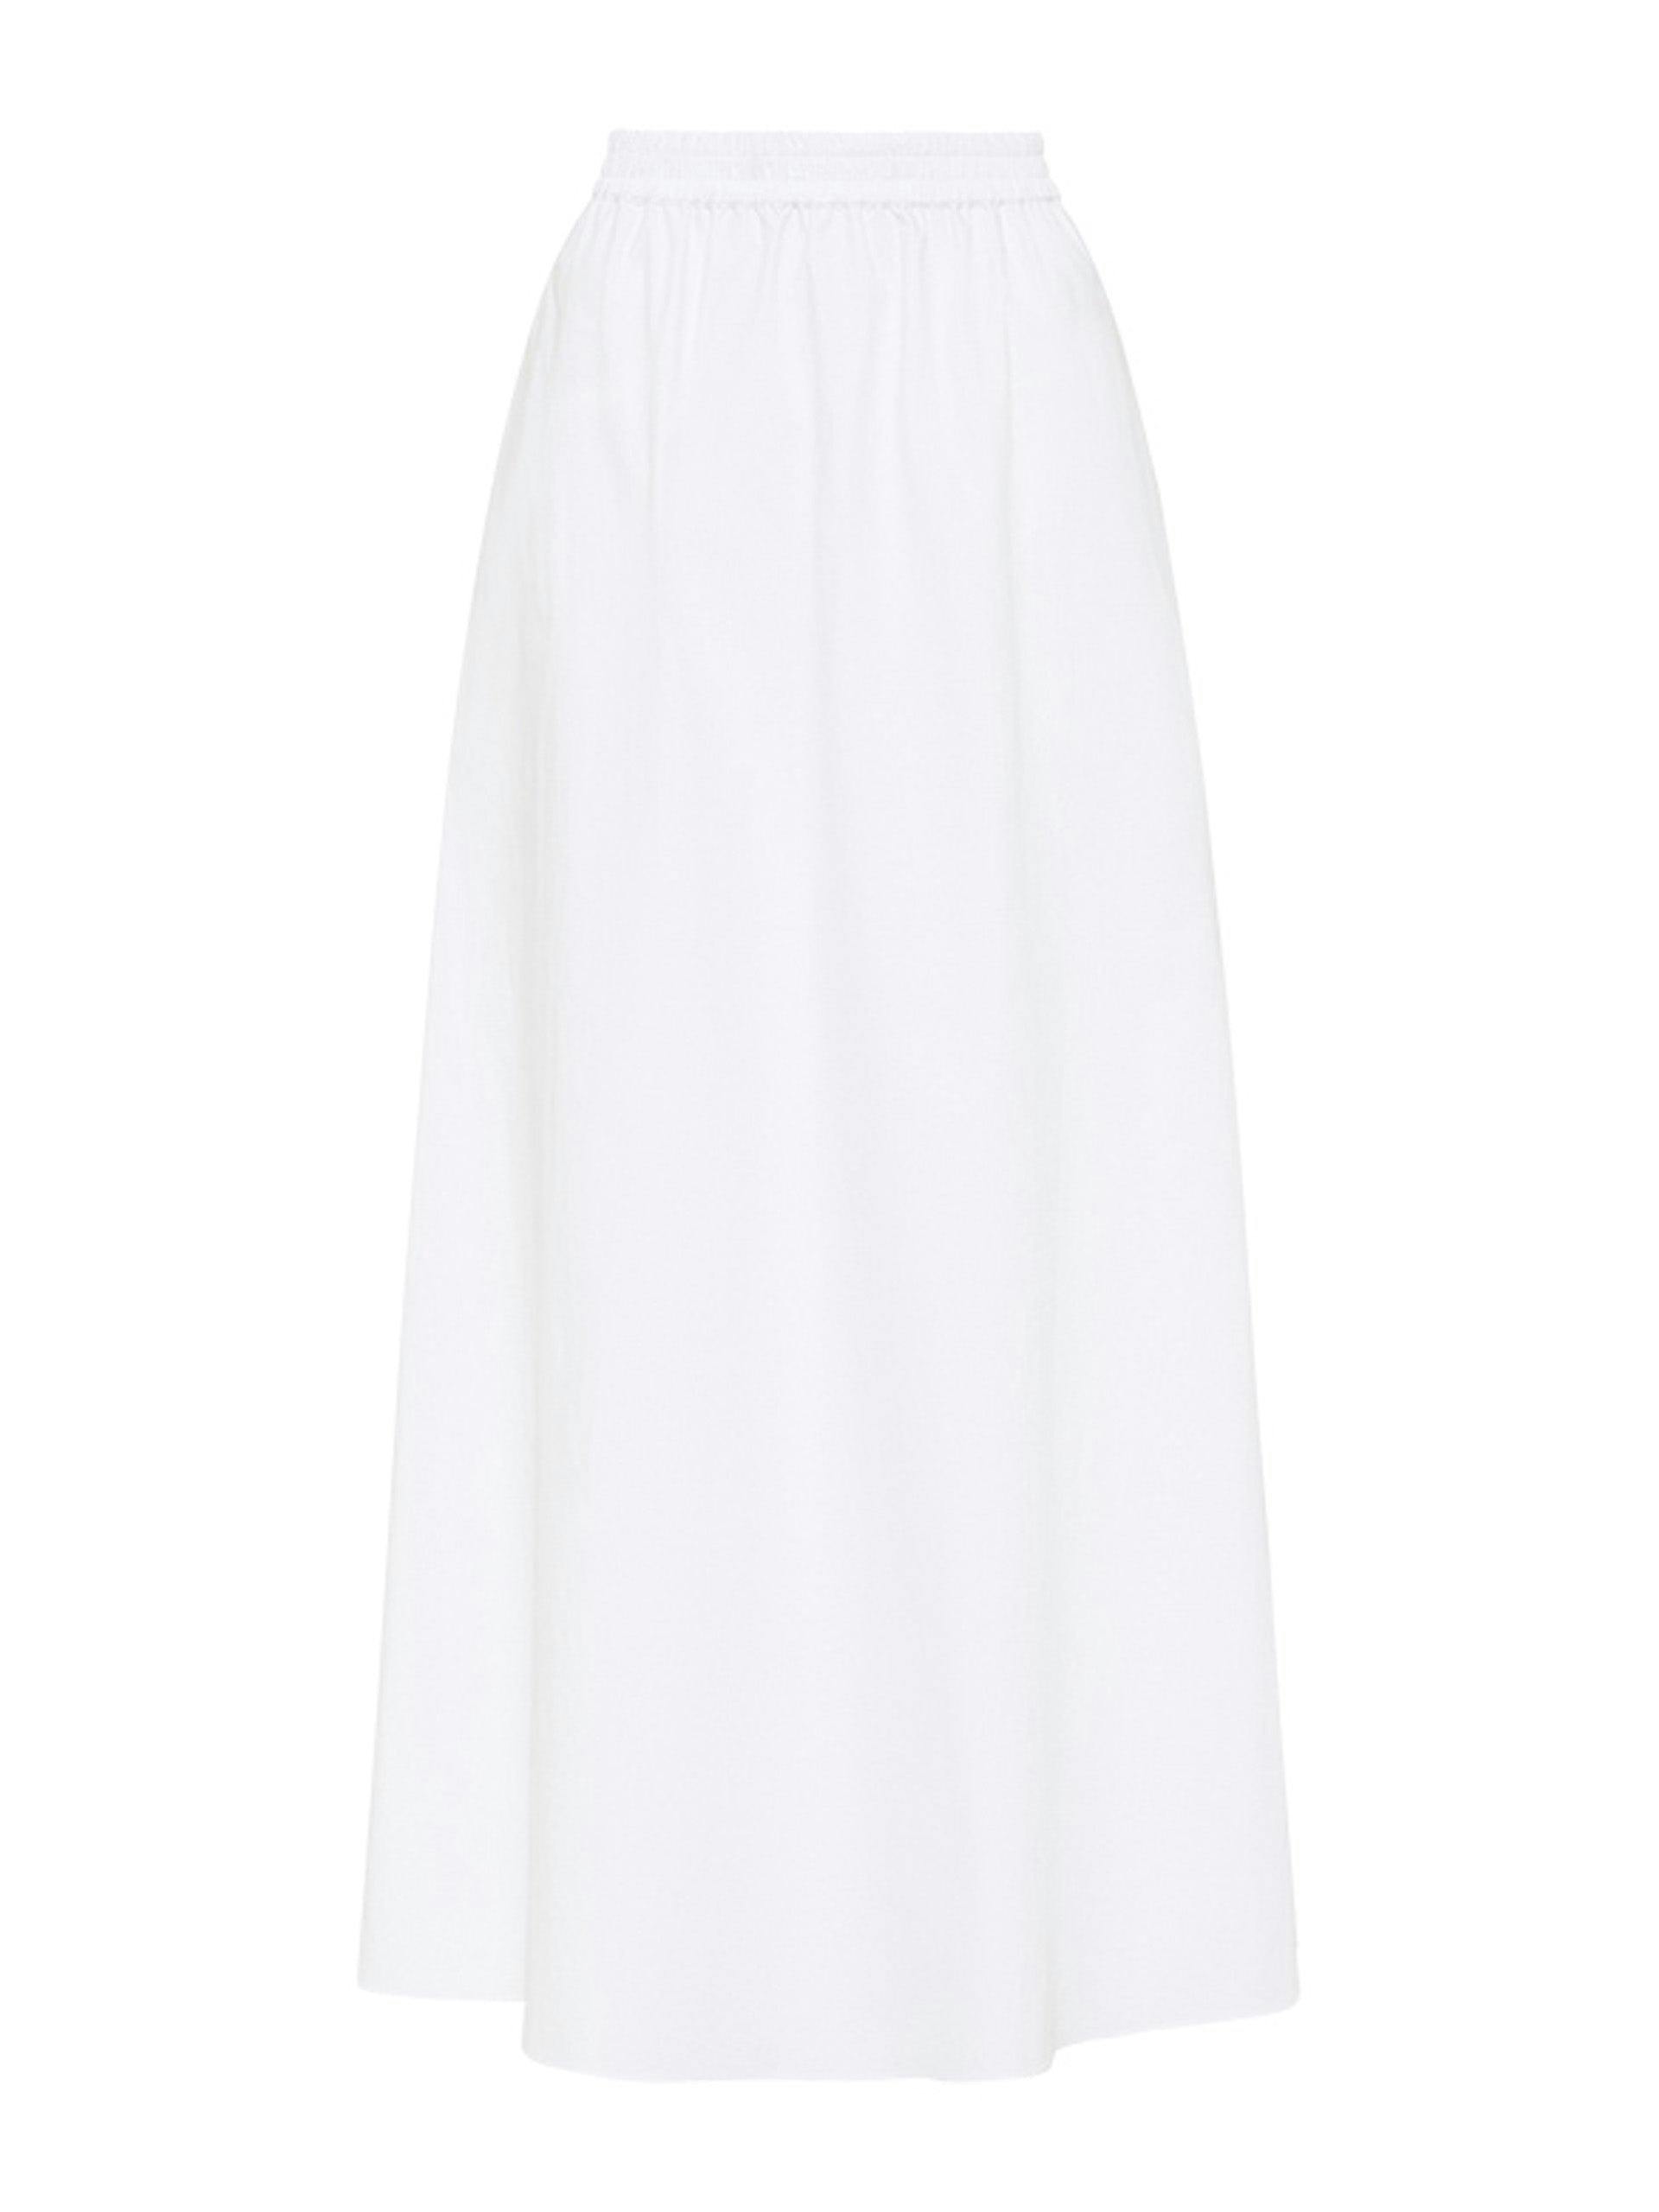 White cotton relaxed everyday skirt